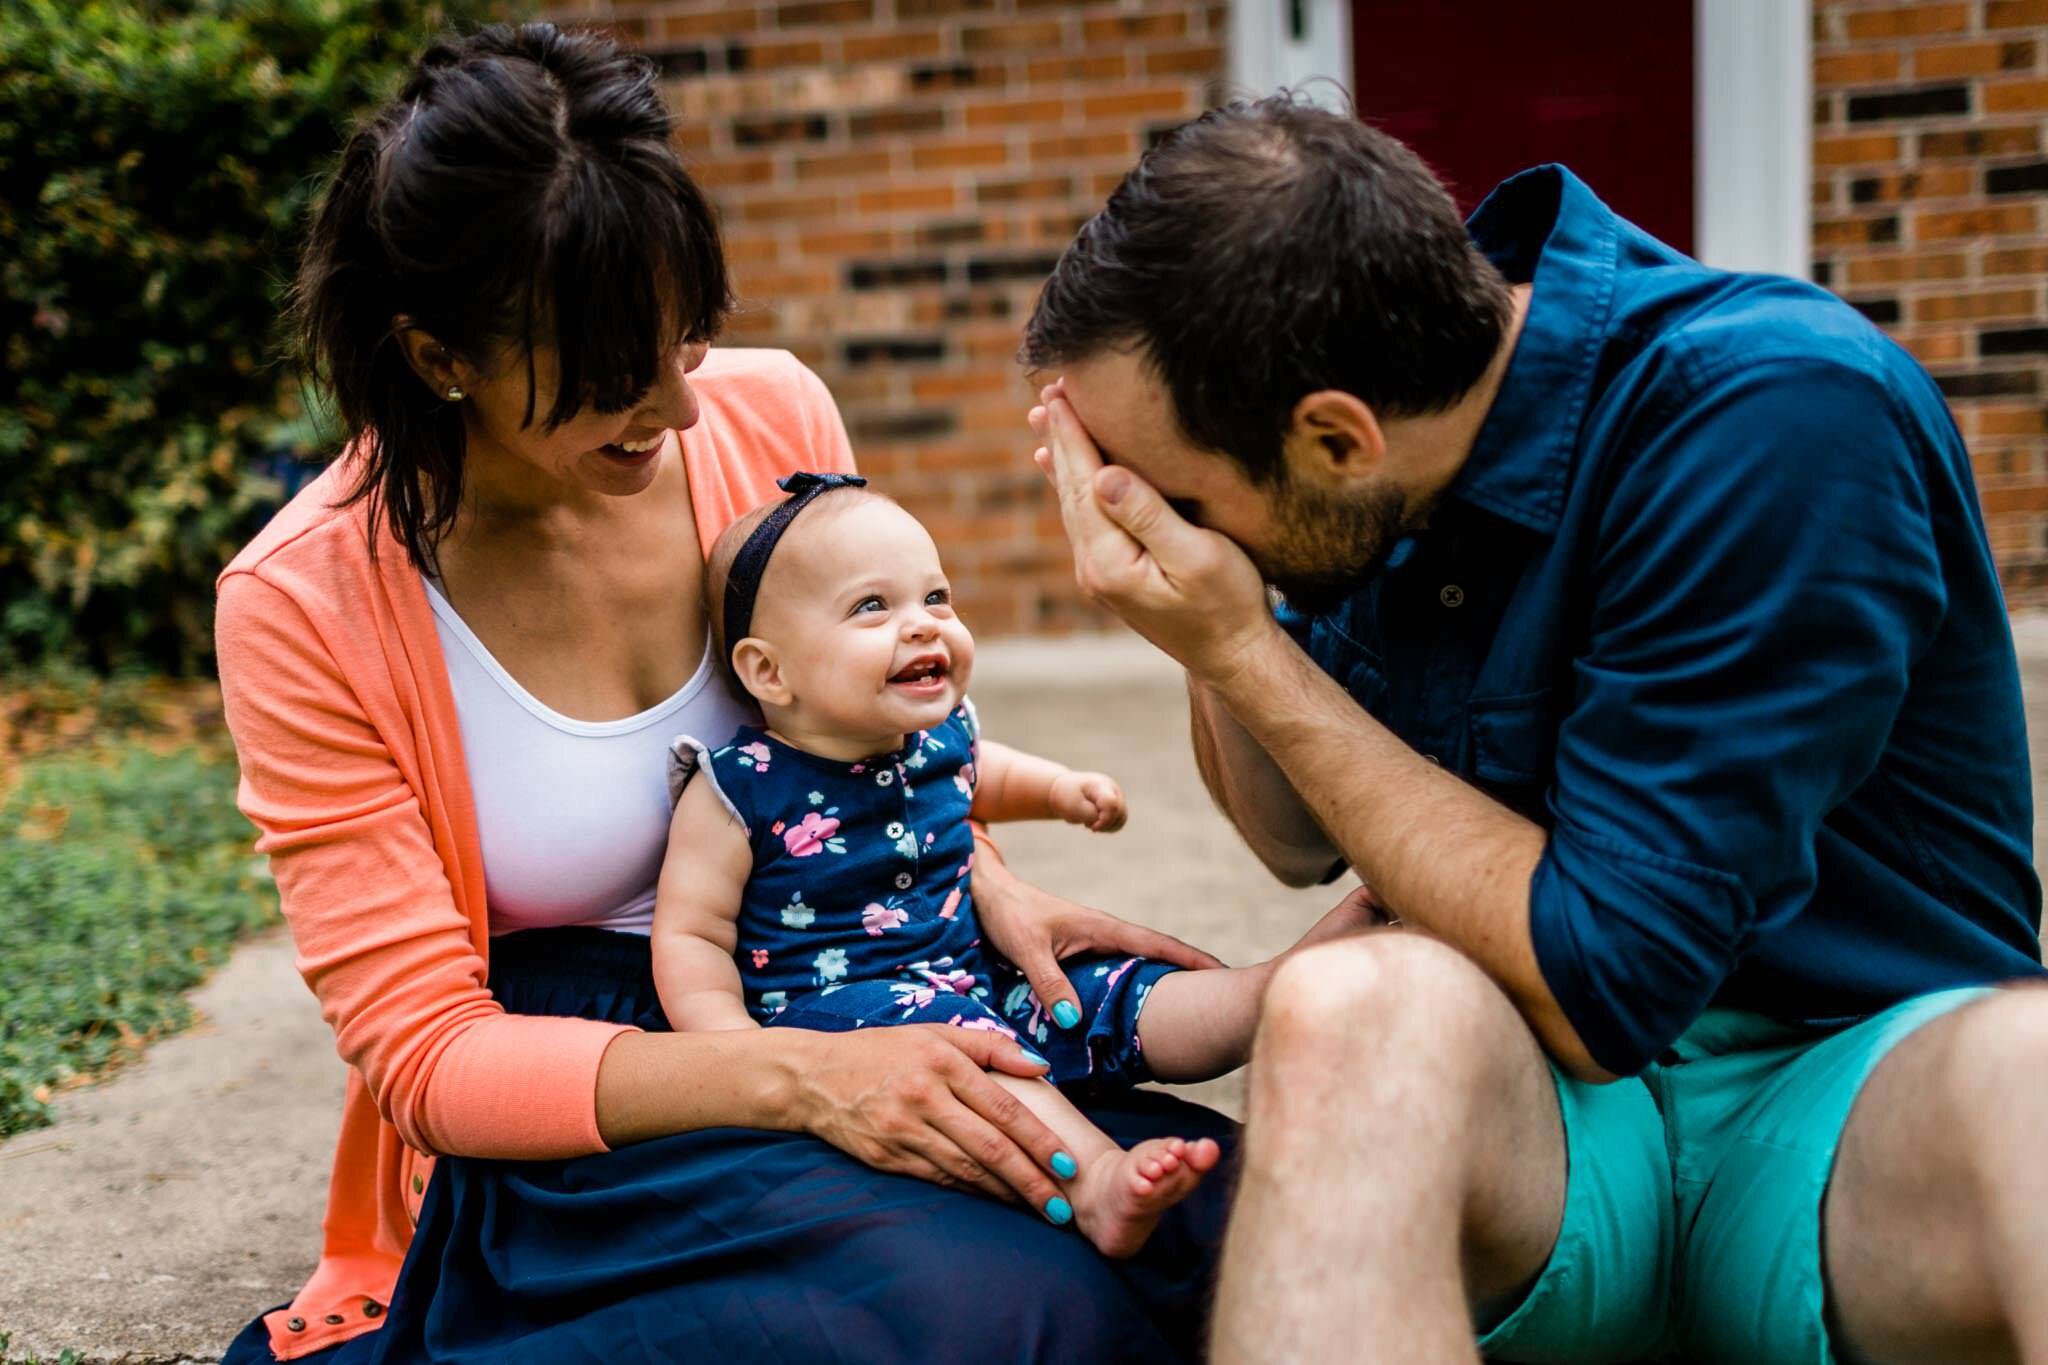 Raleigh Family Photographer | By G. Lin Photography | Parents playing peekaboo with baby girl